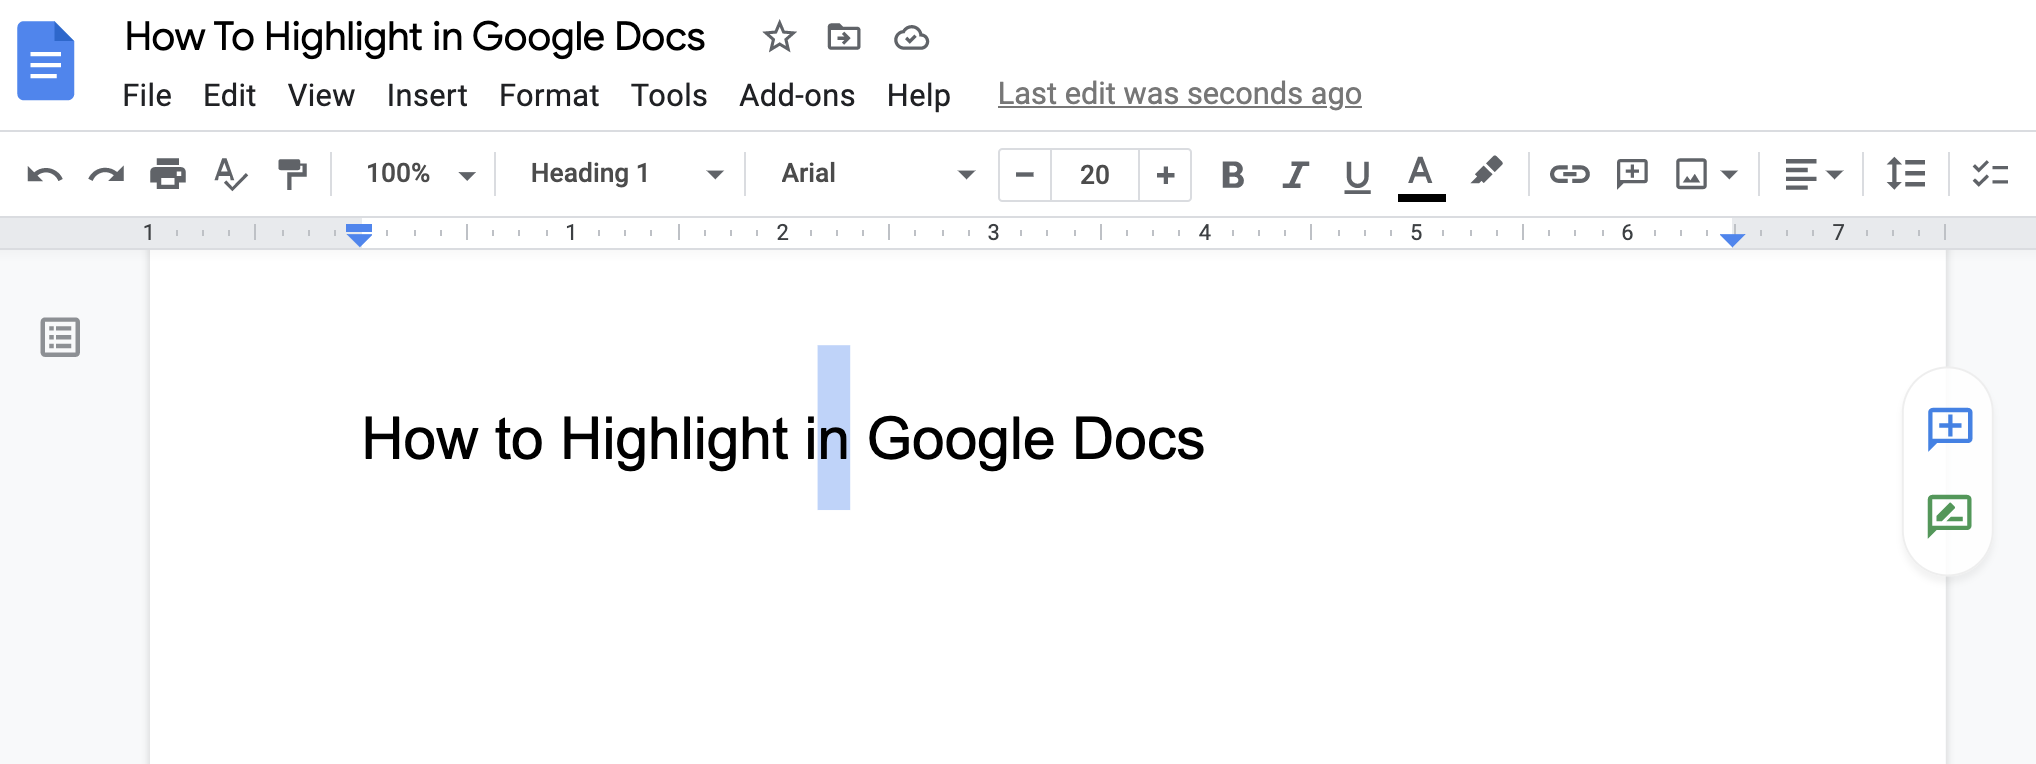 You-must-select-text-before-you-highlight-it.-Selected-text-is-blue-in-Google-Docs.